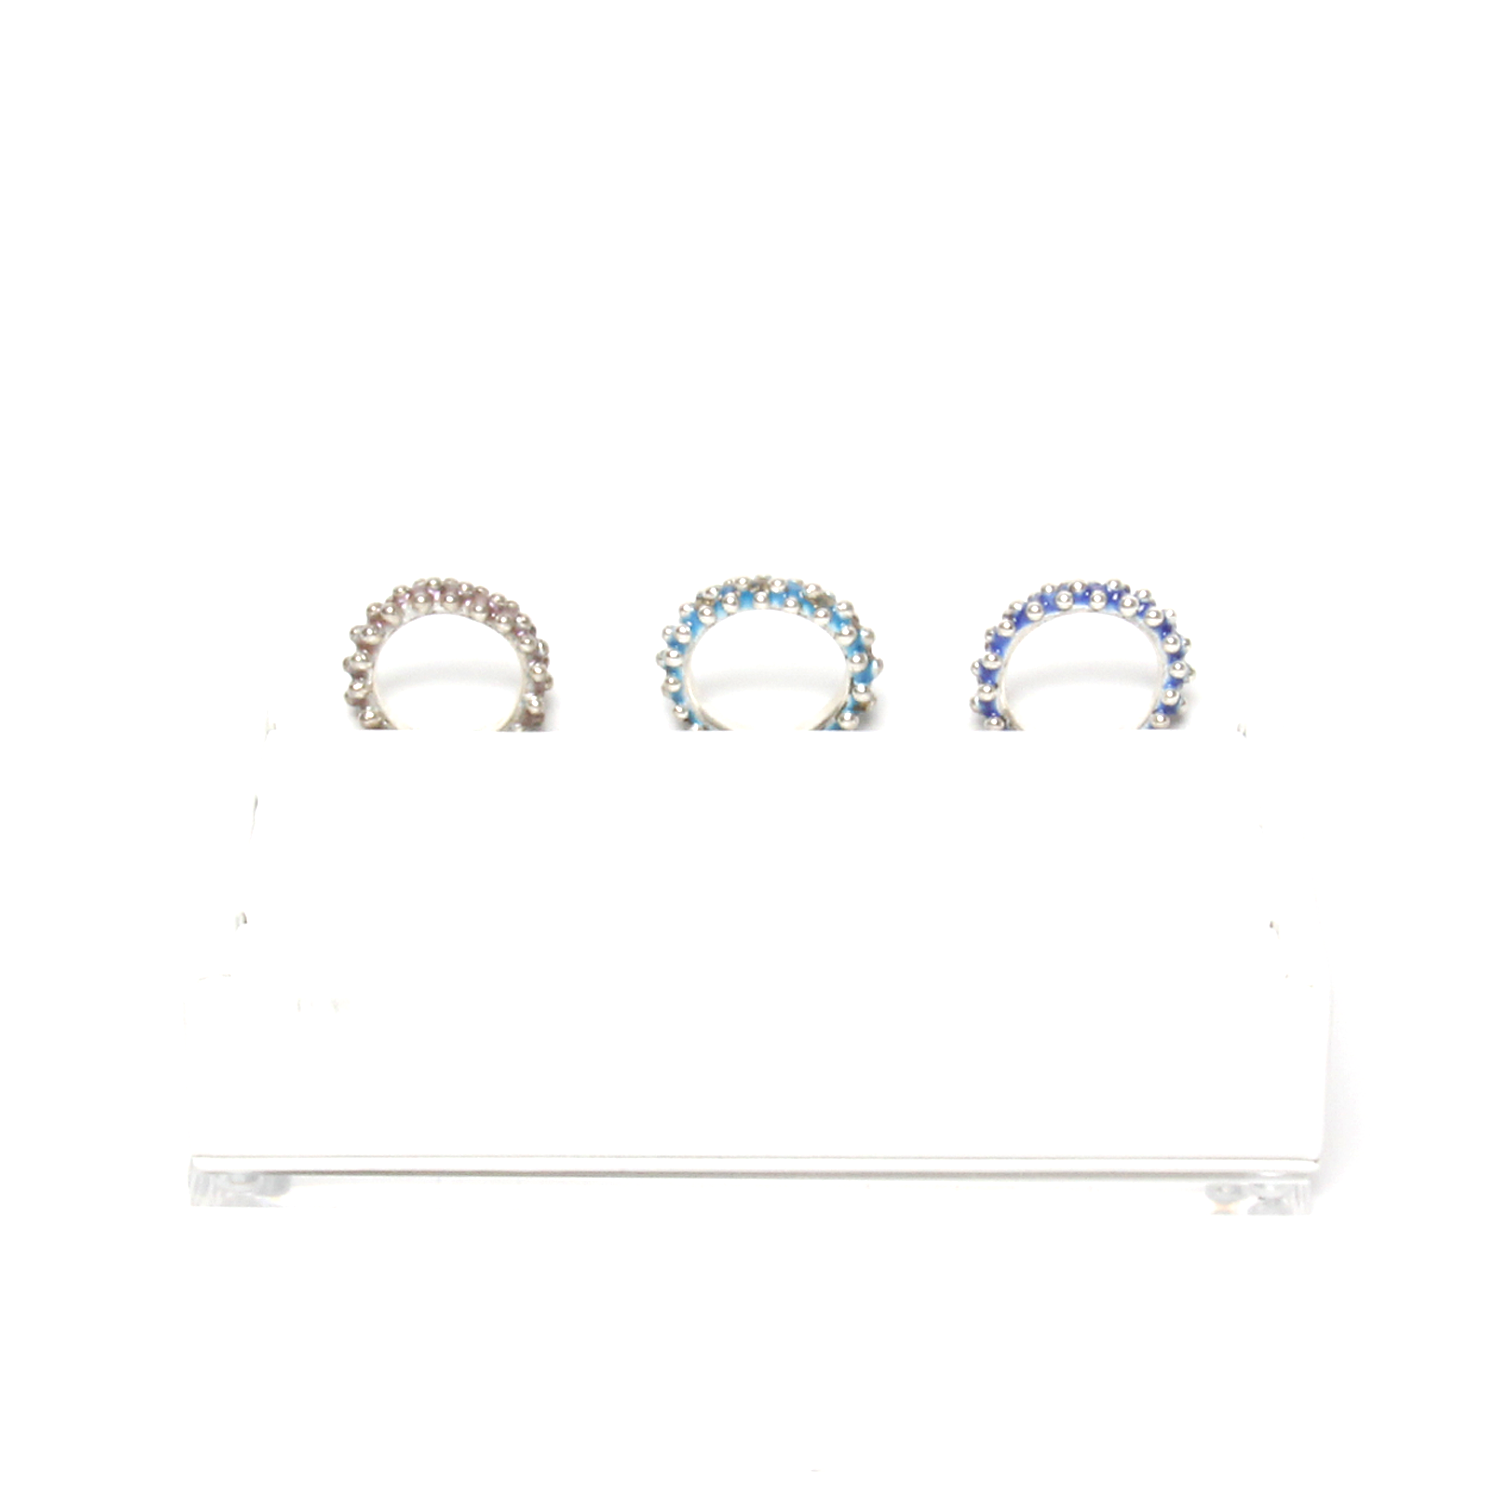 Cinelli Maillet: Blowfish Eternity Ring in Blue Product Image 2 of 3